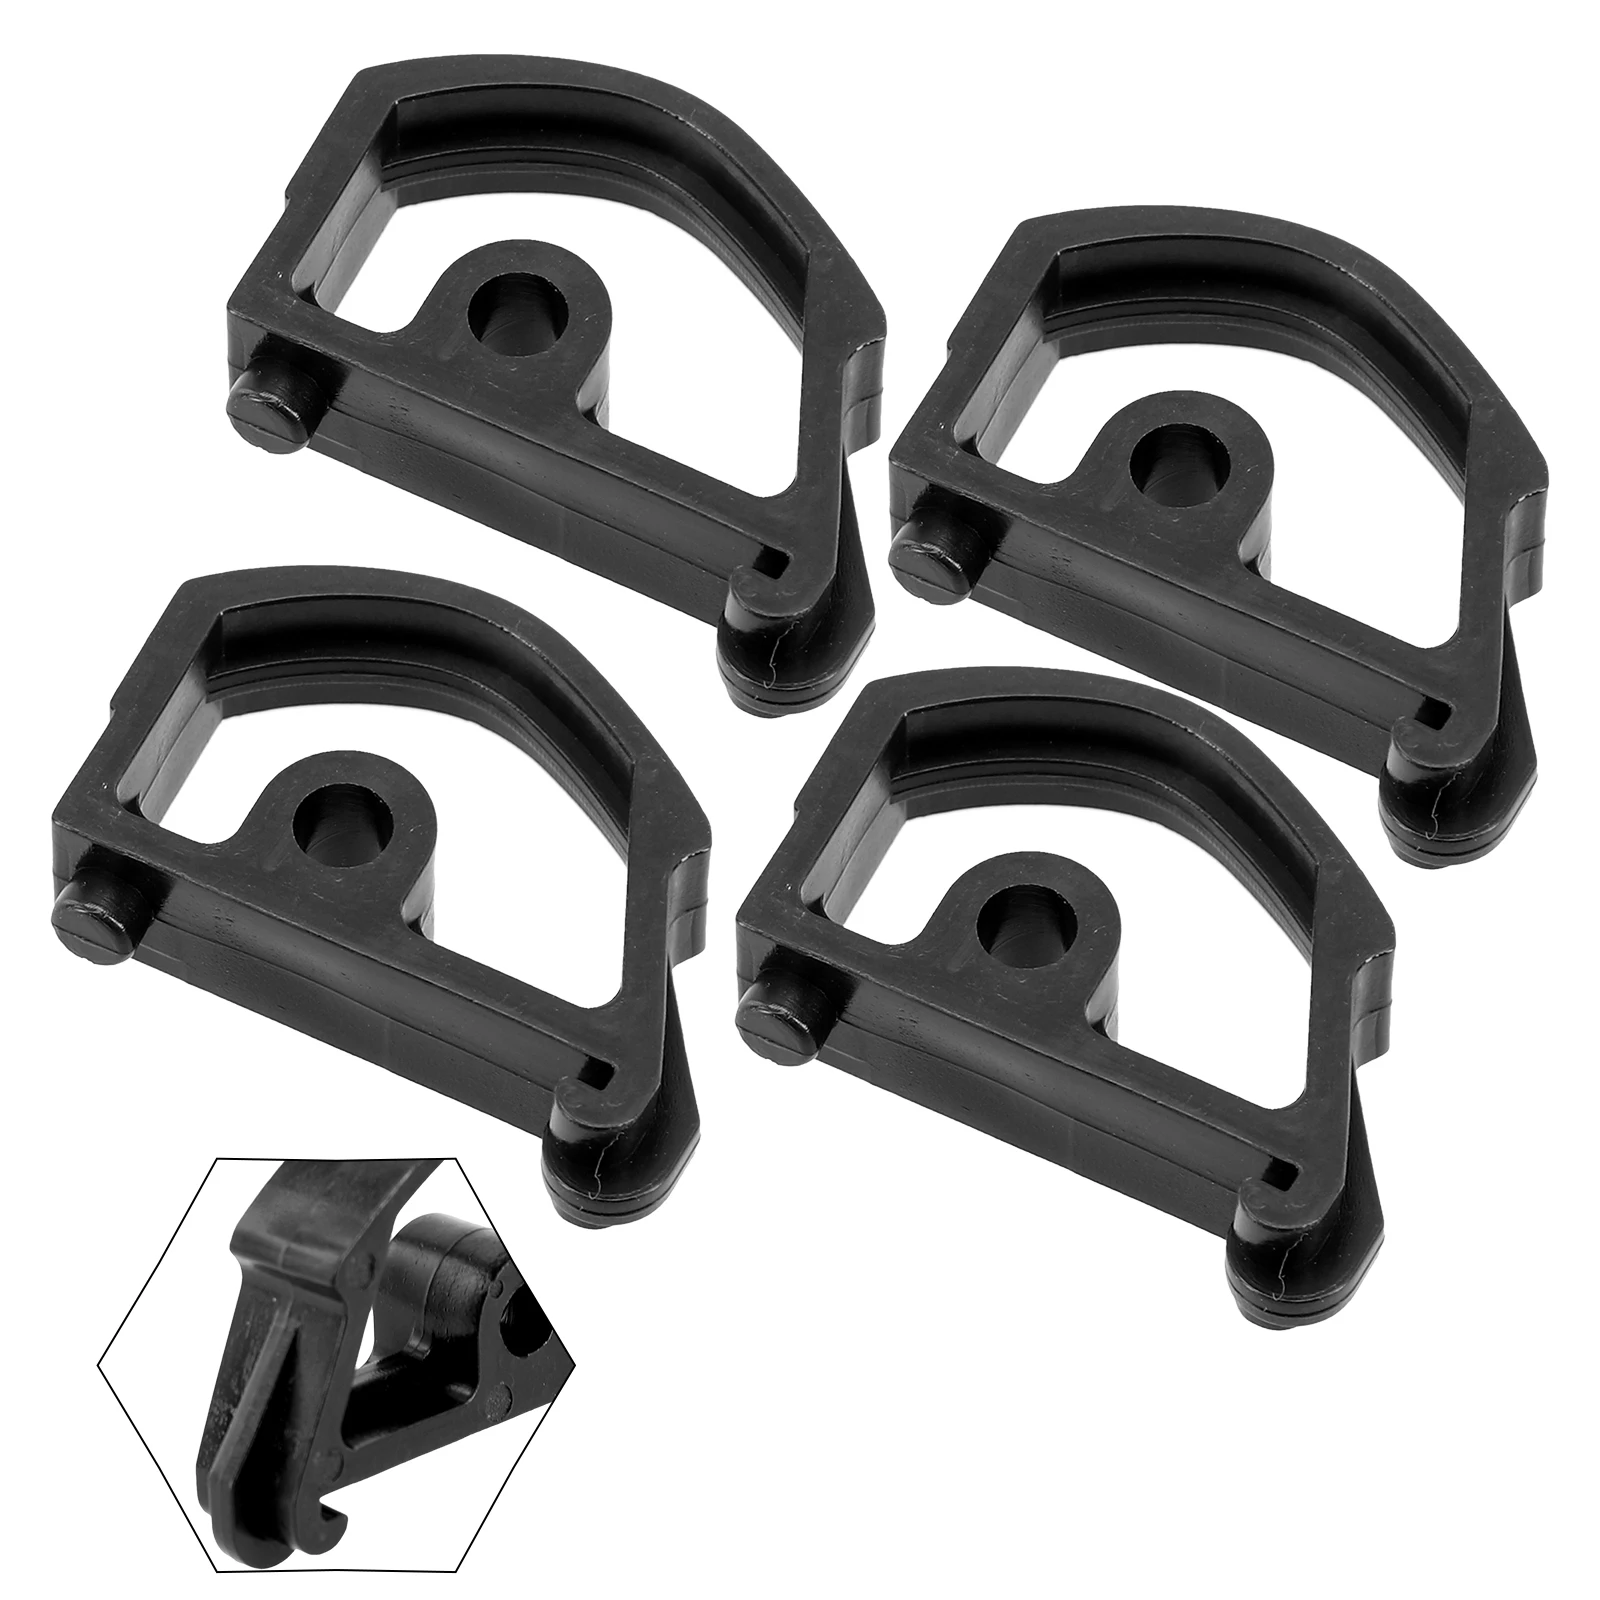 4Pcs For Black And Decker Workmate Workbench Leg Catch Spring Part 242416-00 Work Bench Leg Catch Replacement garden swing bench with canipy black